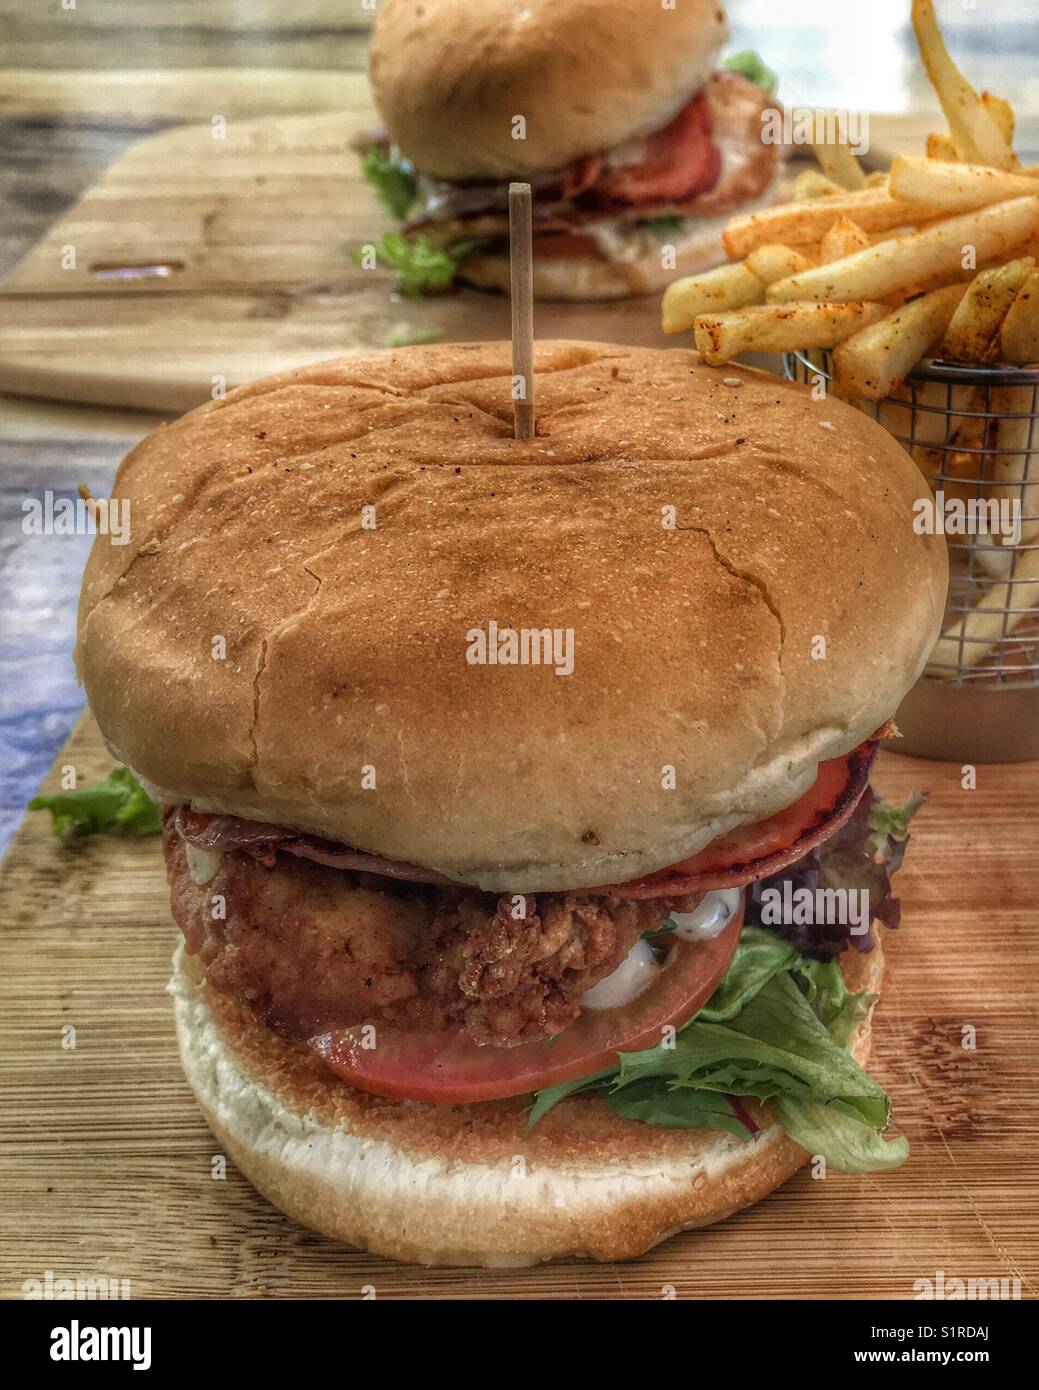 Two juicy fried chicken hamburgers and chips in Australia. Know elsewhere as fried chicken sandwiches and fries Stock Photo